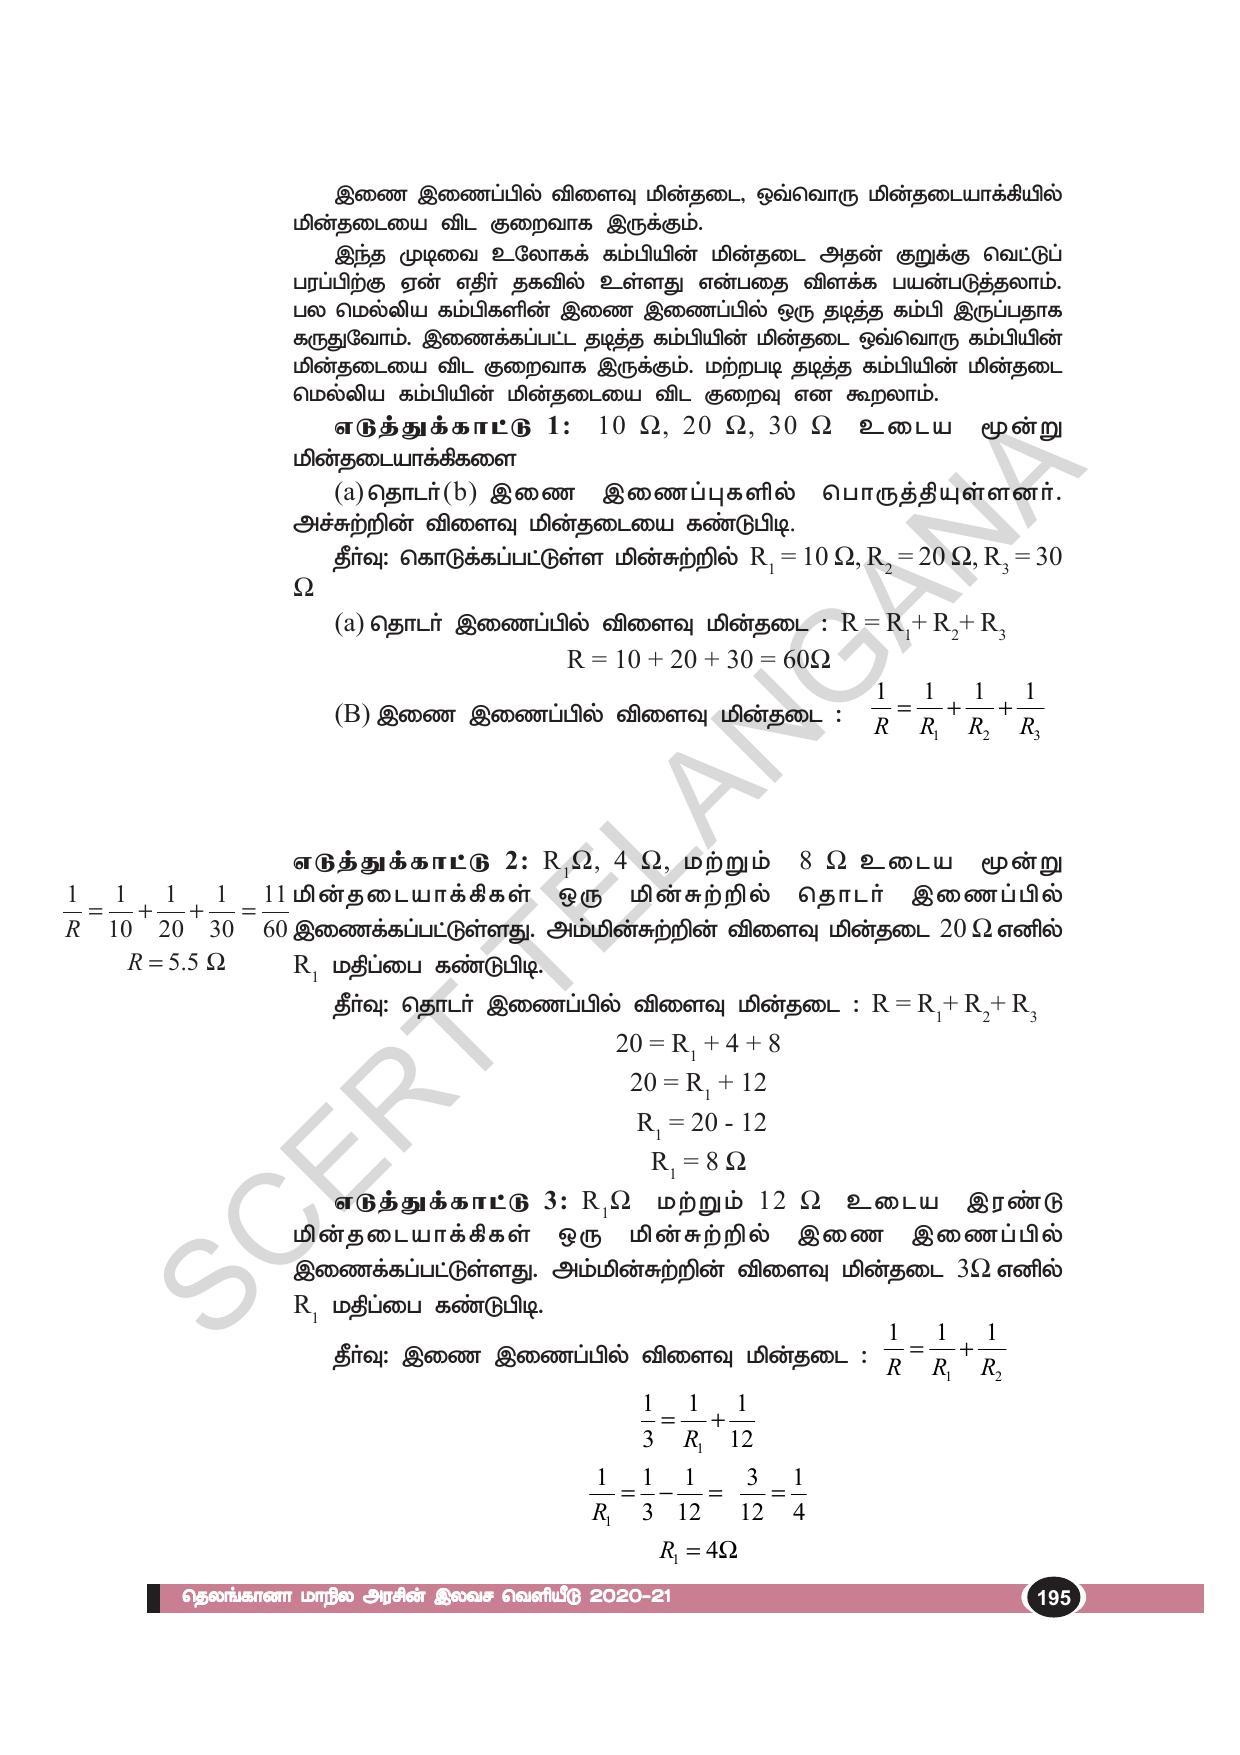 TS SCERT Class 10 Physical Science(Tamil Medium) Text Book - Page 207